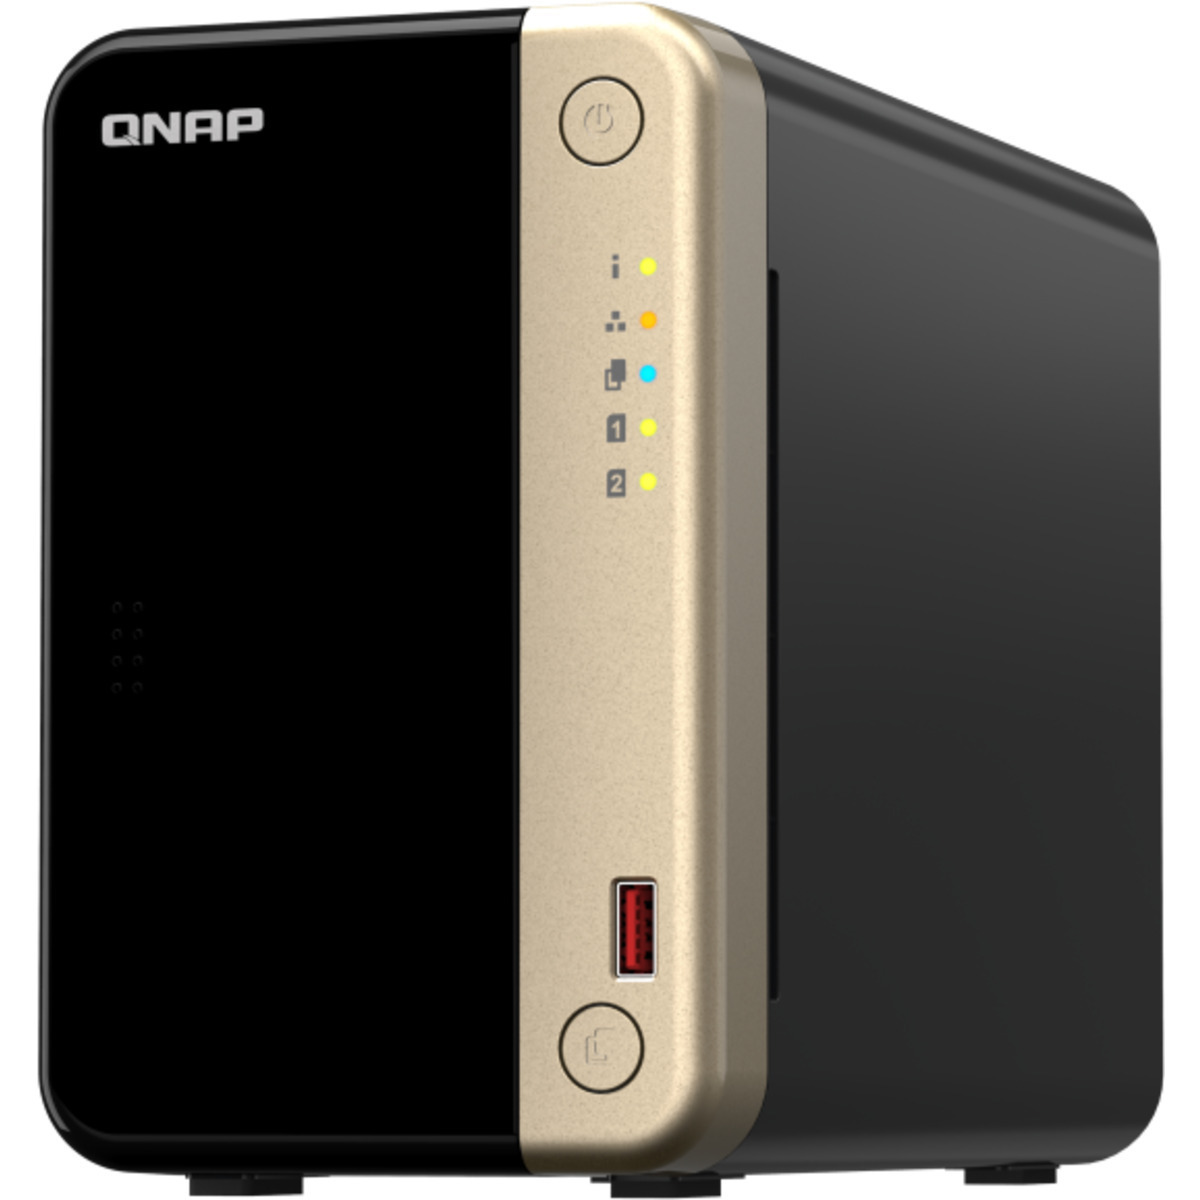 QNAP TS-264 8tb 2-Bay Desktop Multimedia / Power User / Business NAS - Network Attached Storage Device 2x4tb Samsung 870 EVO MZ-77E4T0BAM 2.5 560/530MB/s SATA 6Gb/s SSD CONSUMER Class Drives Installed - Burn-In Tested - ON SALE TS-264